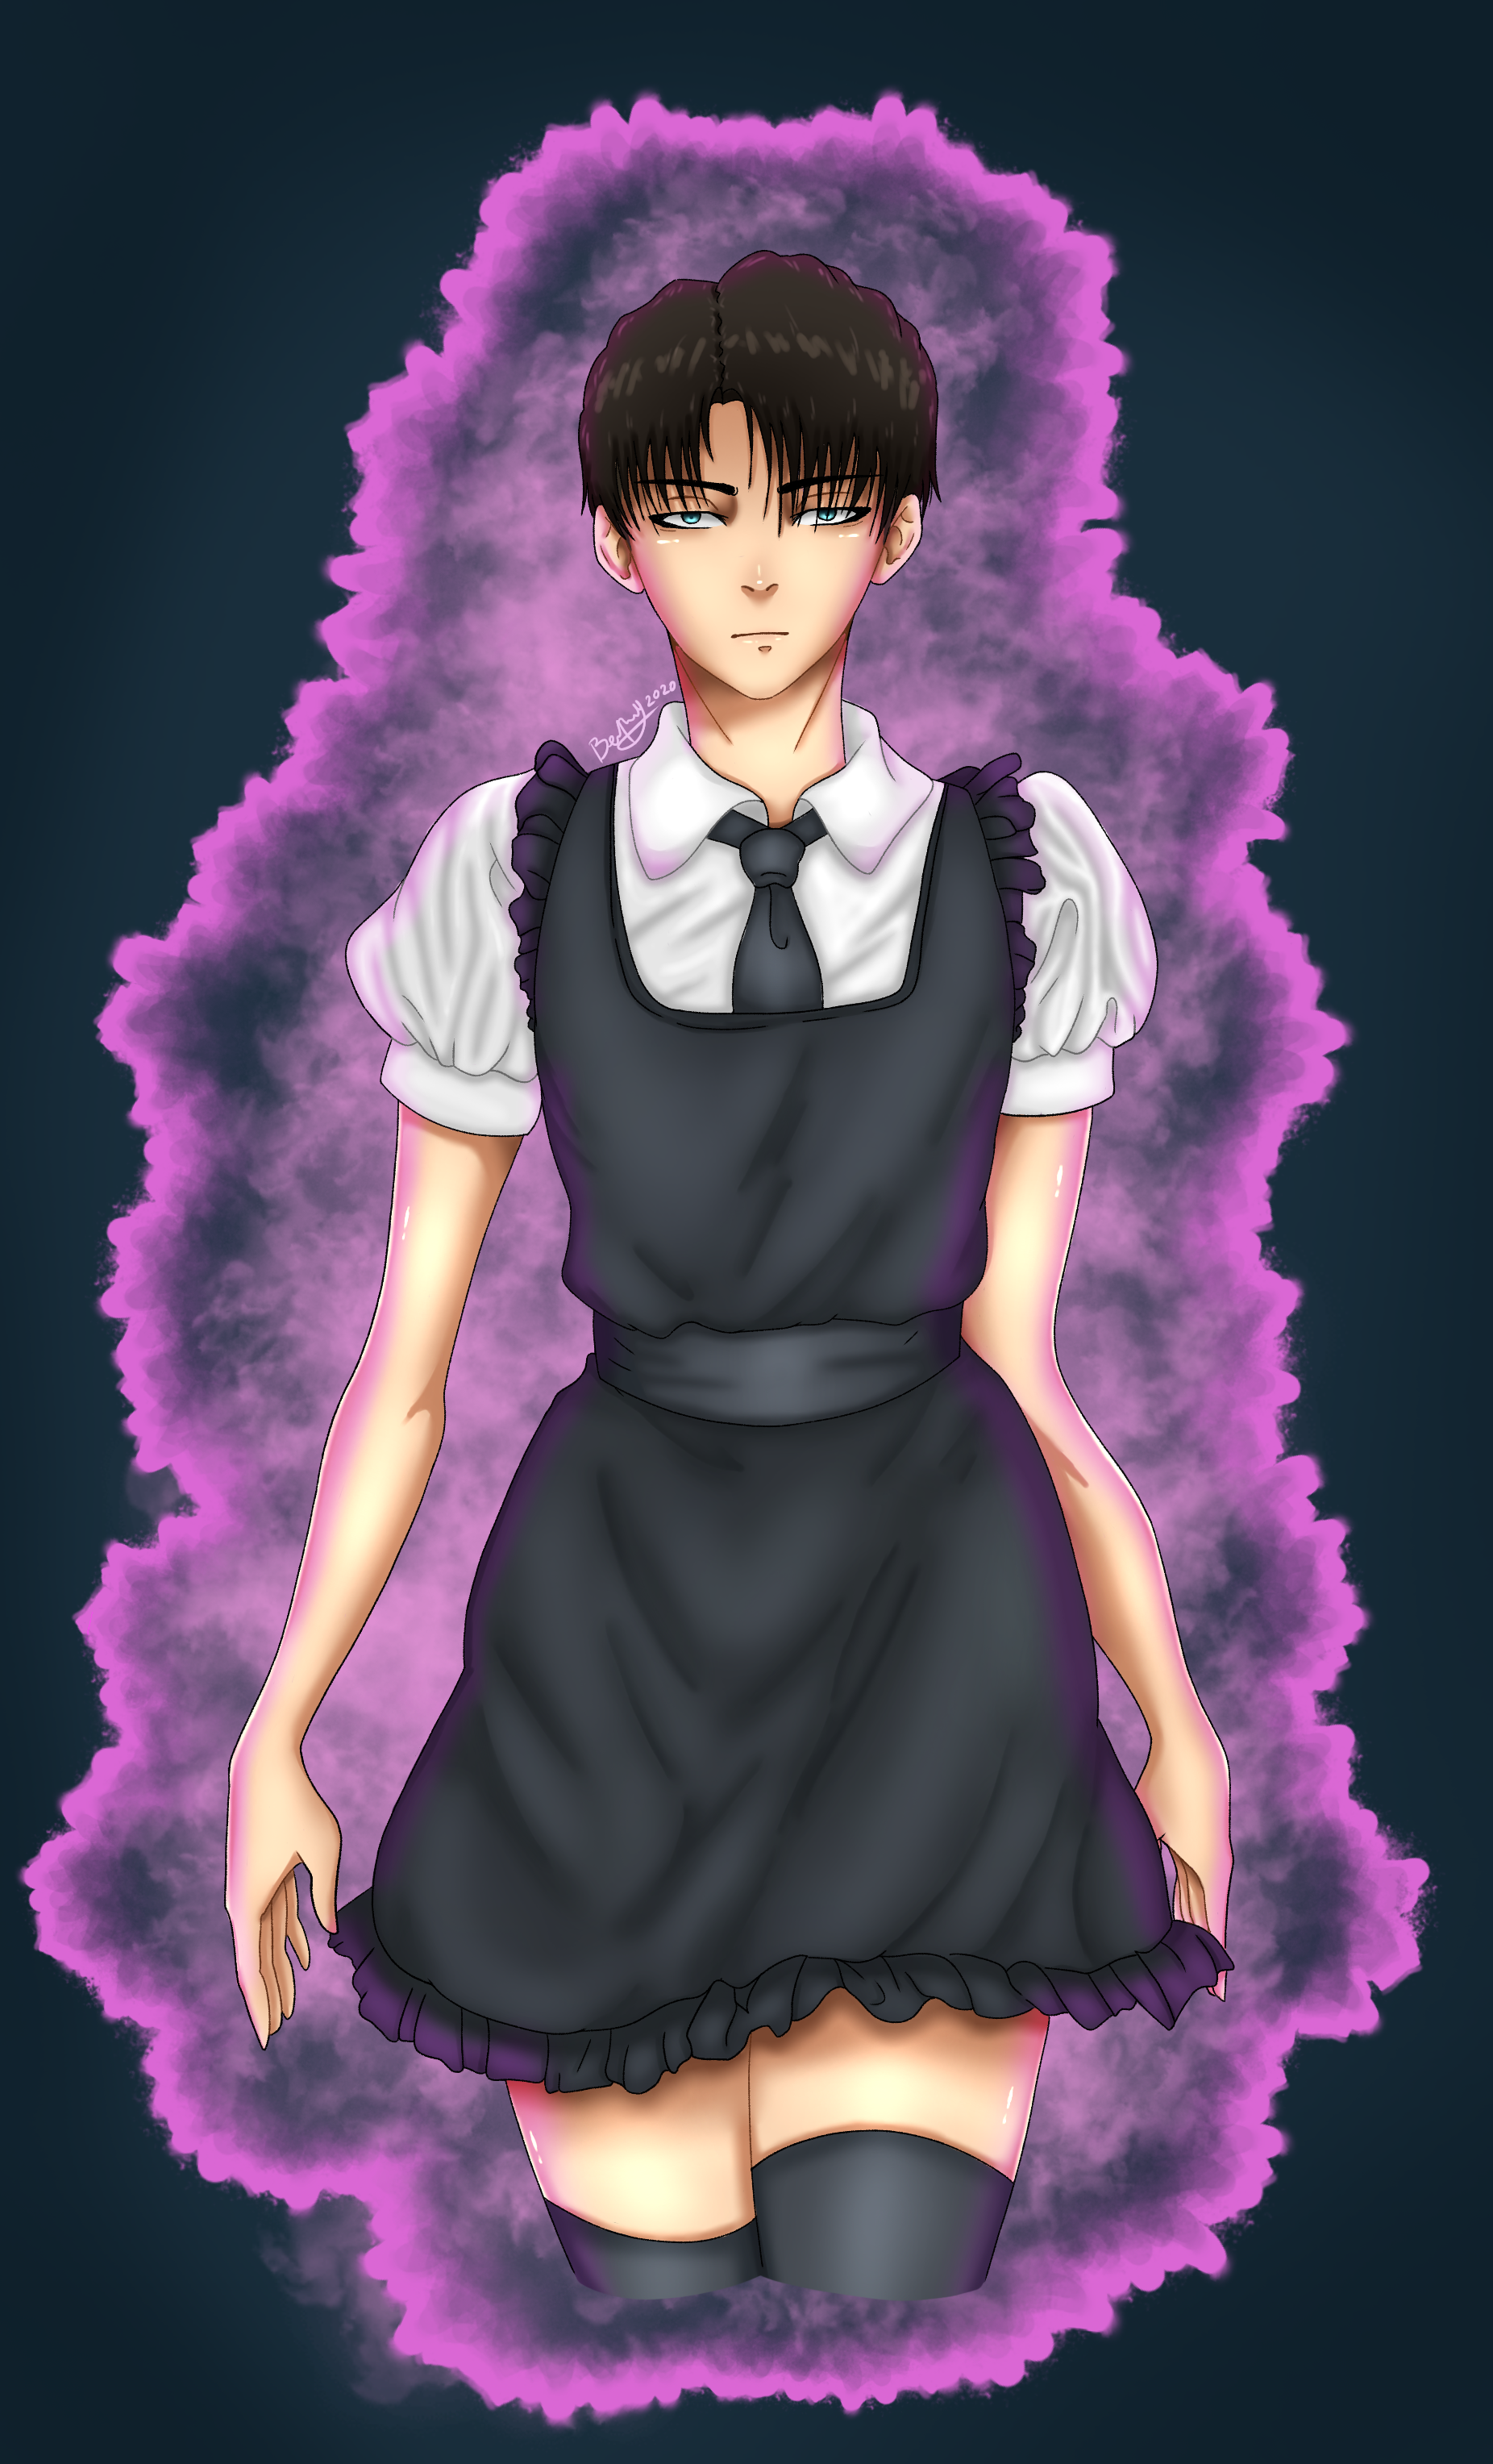 Akerman in a maid outfit on DeviantArt